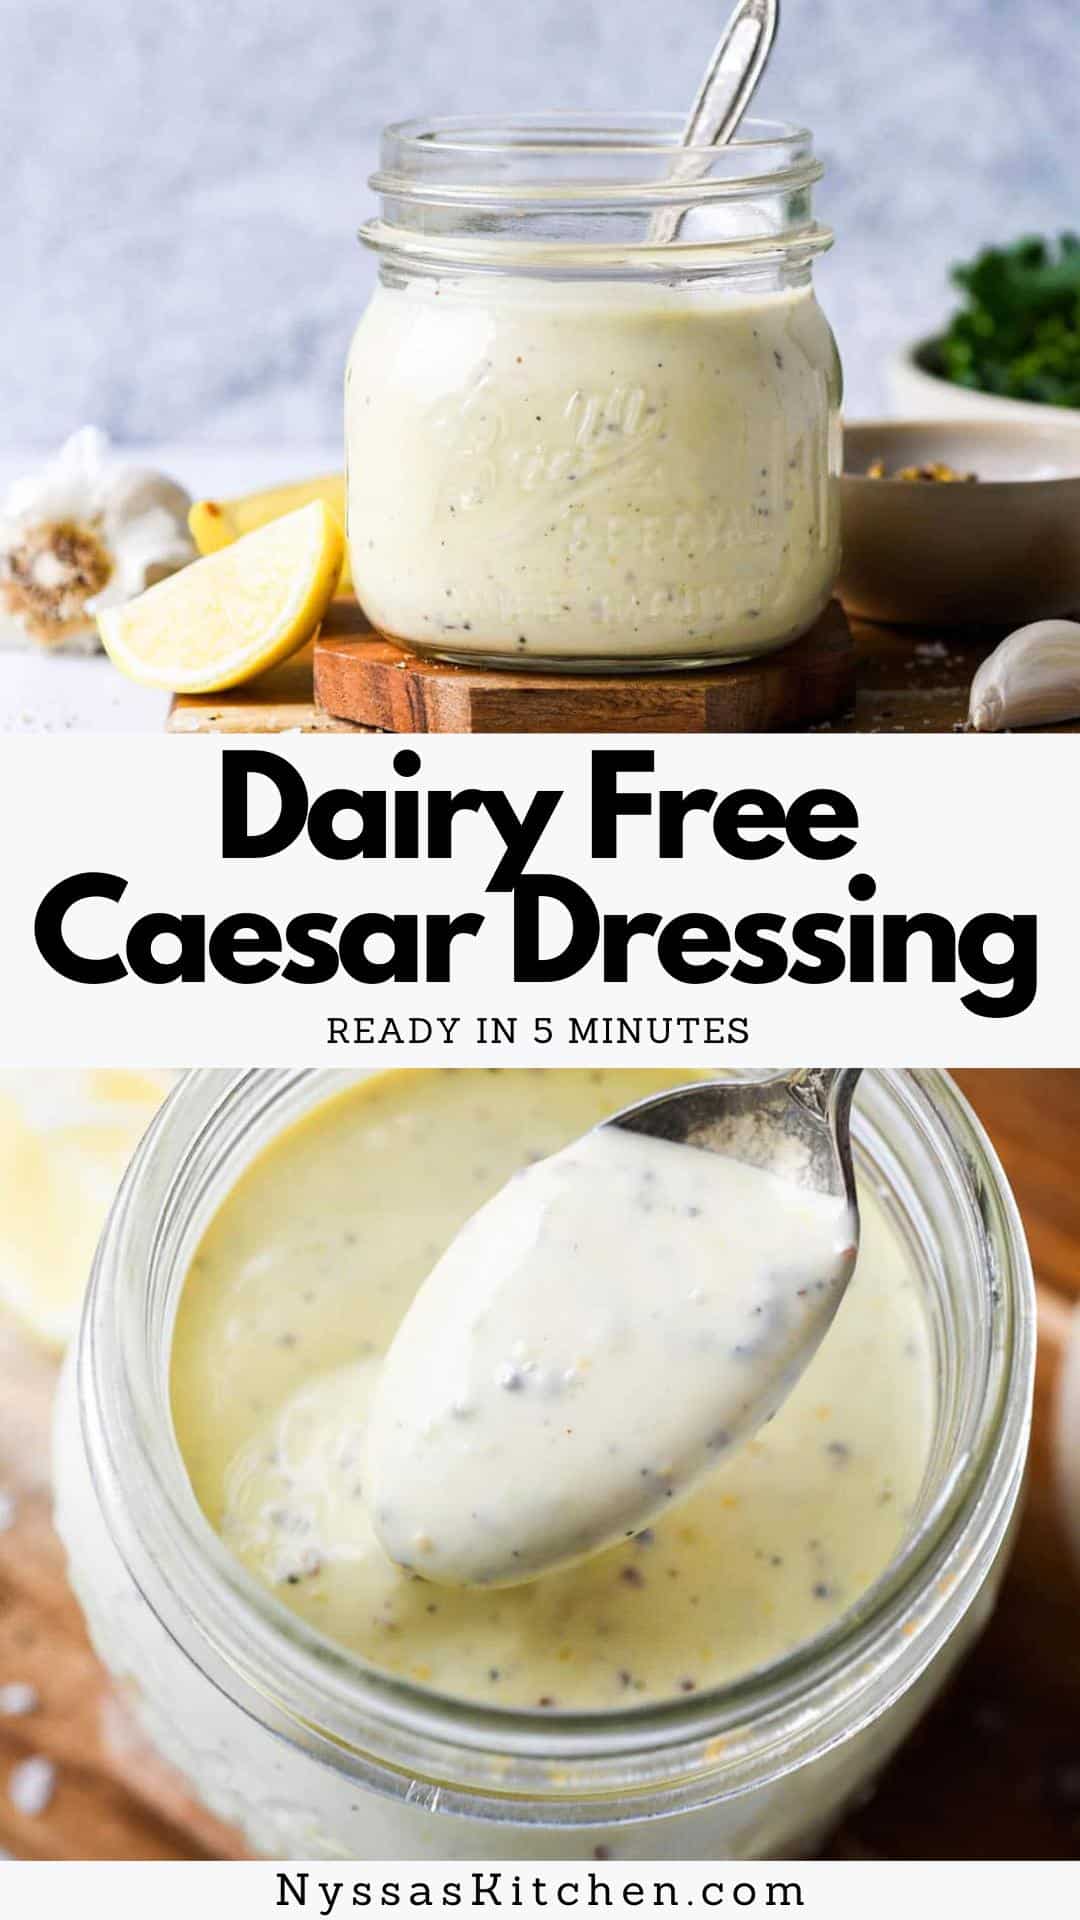 This creamy dairy free Caesar is one of my all time favorite salad dressings! It is rich, lemony, garlicky, insanely creamy, and full of punchy flavor. Perfect for a swoon worthy homemade Caesar salad. And it comes together in less than 5 minutes! Can be made with or without anchovies. Whole30, paleo, and low carb.